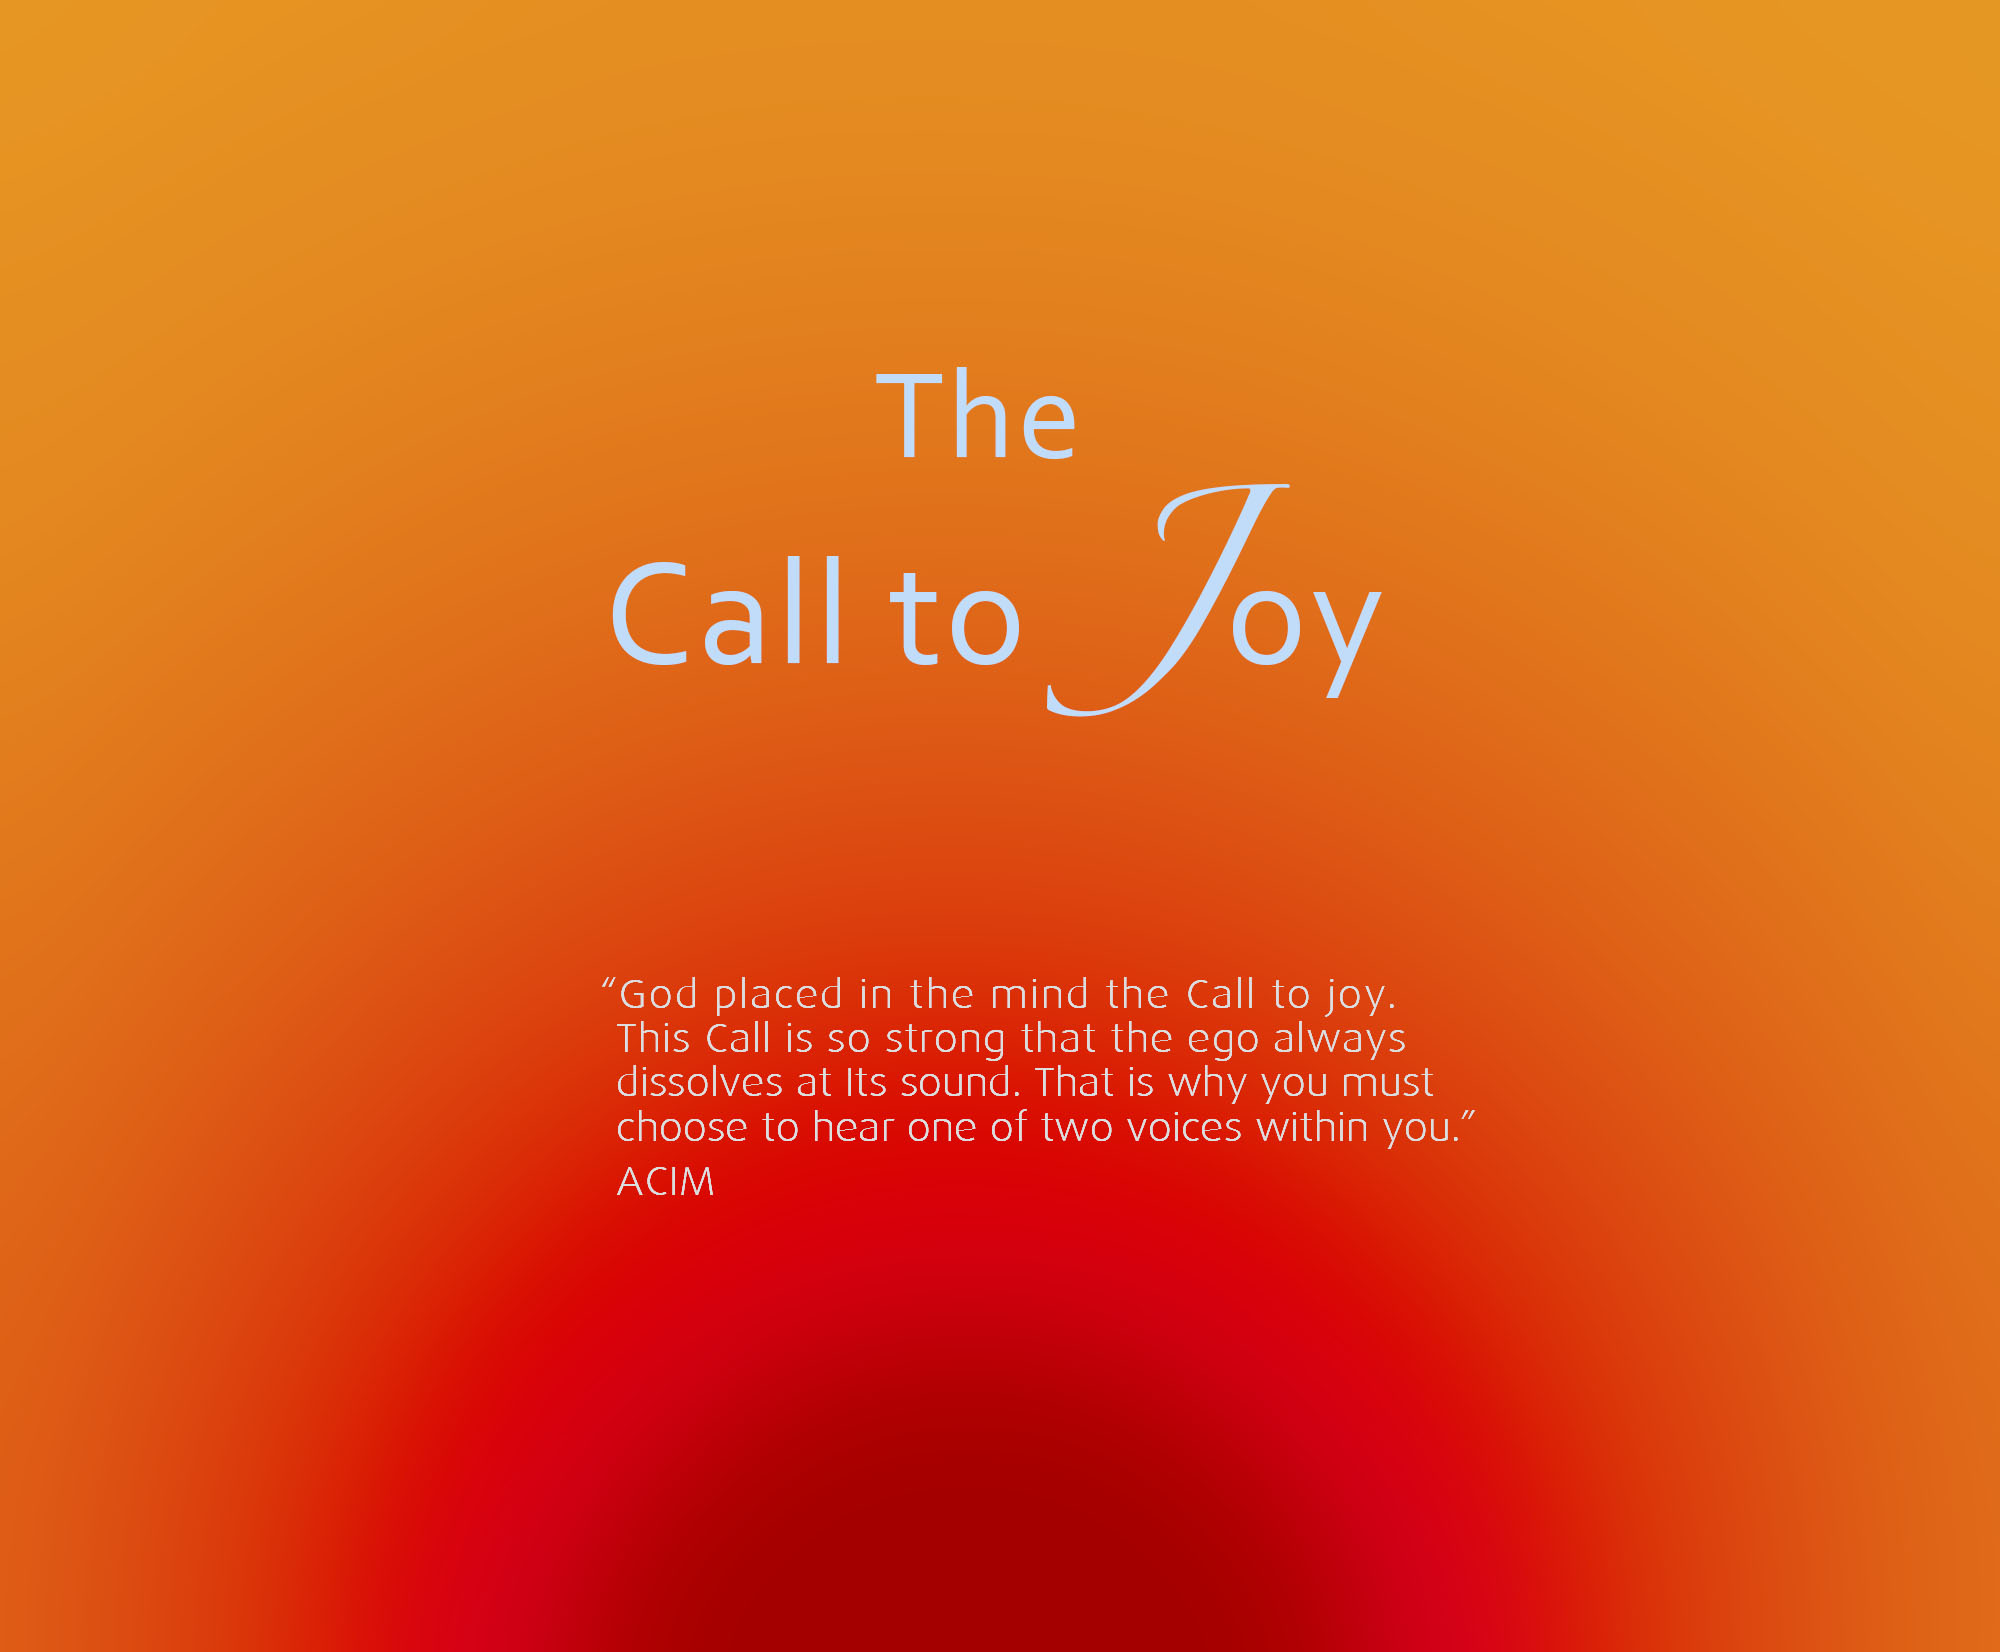 God placed in the mind the Call to joy… This Call is so strong that the ego always dissolves at Its sound. That is why you must choose to hear one of two voices within you.